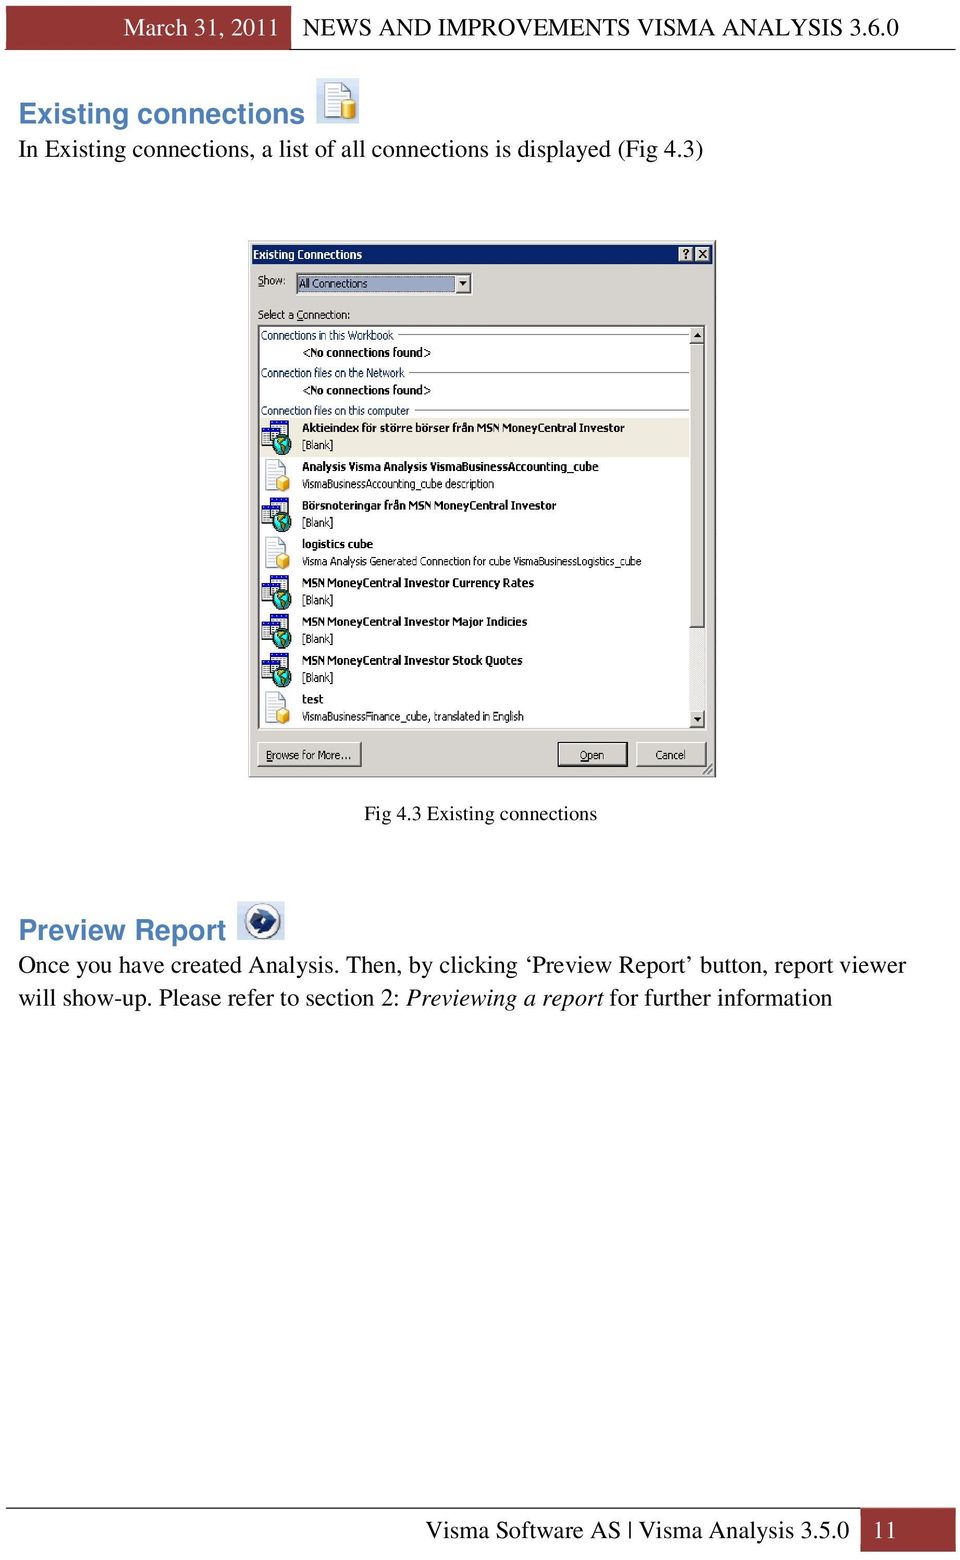 Then, by clicking Preview Report button, report viewer will show-up.